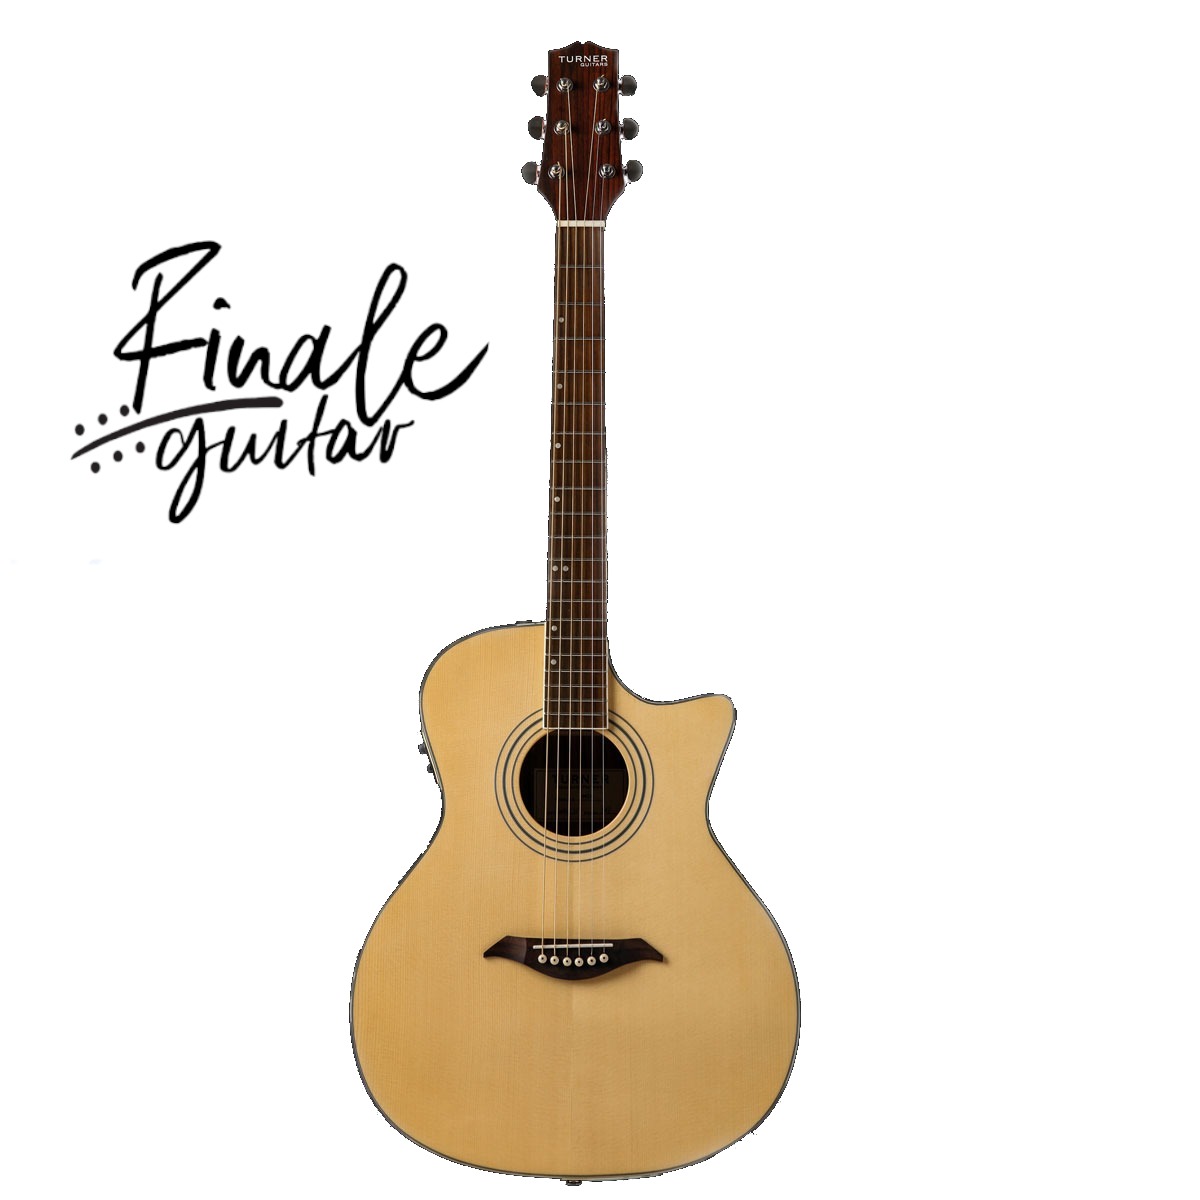 Turner Guitars 44CE for sale in our Sheffield guitar shop, Finale Guitar